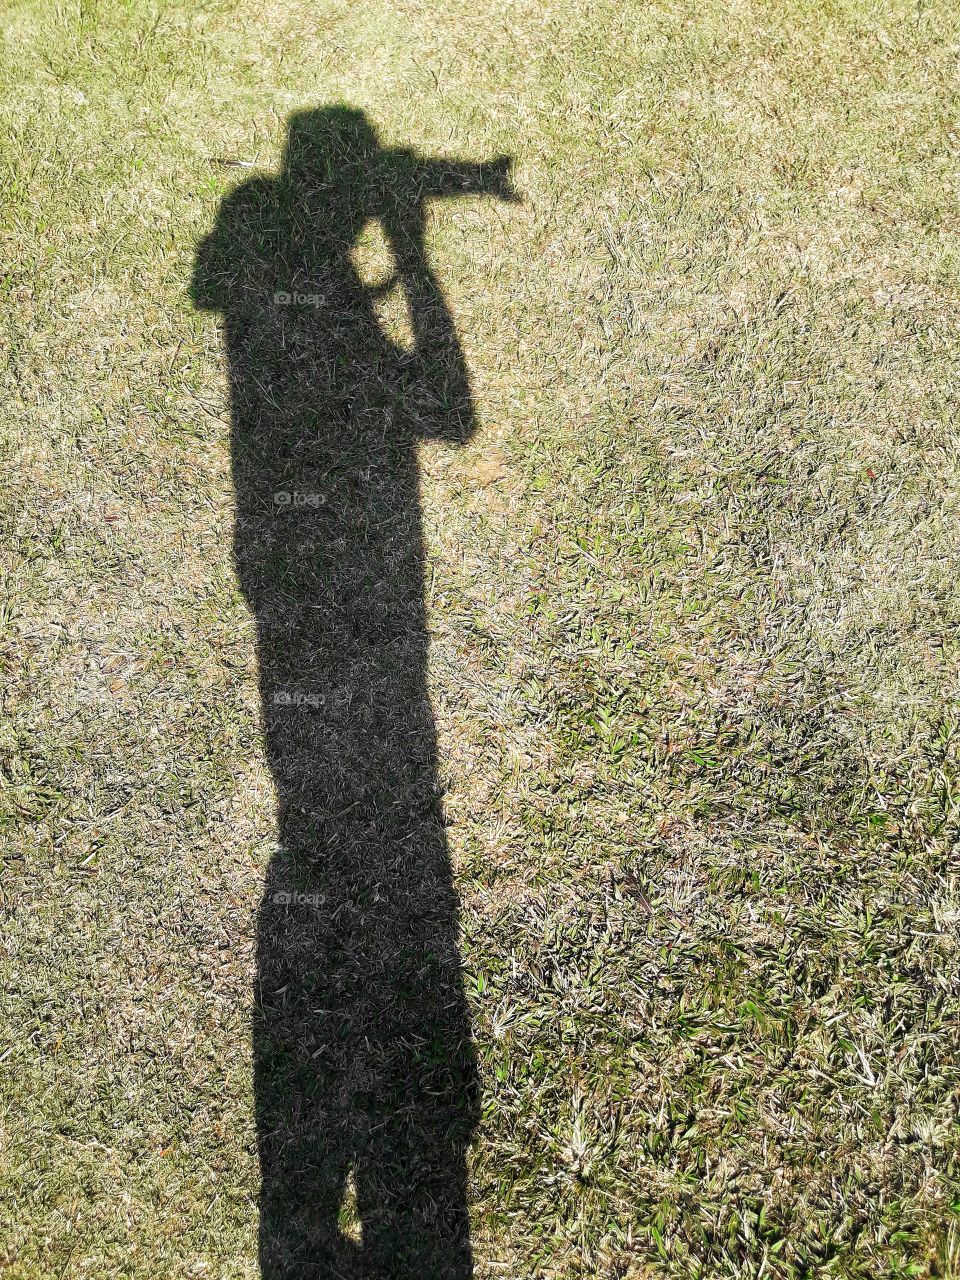 The shadow of the photographer standing on the green lawn, light and shadow.